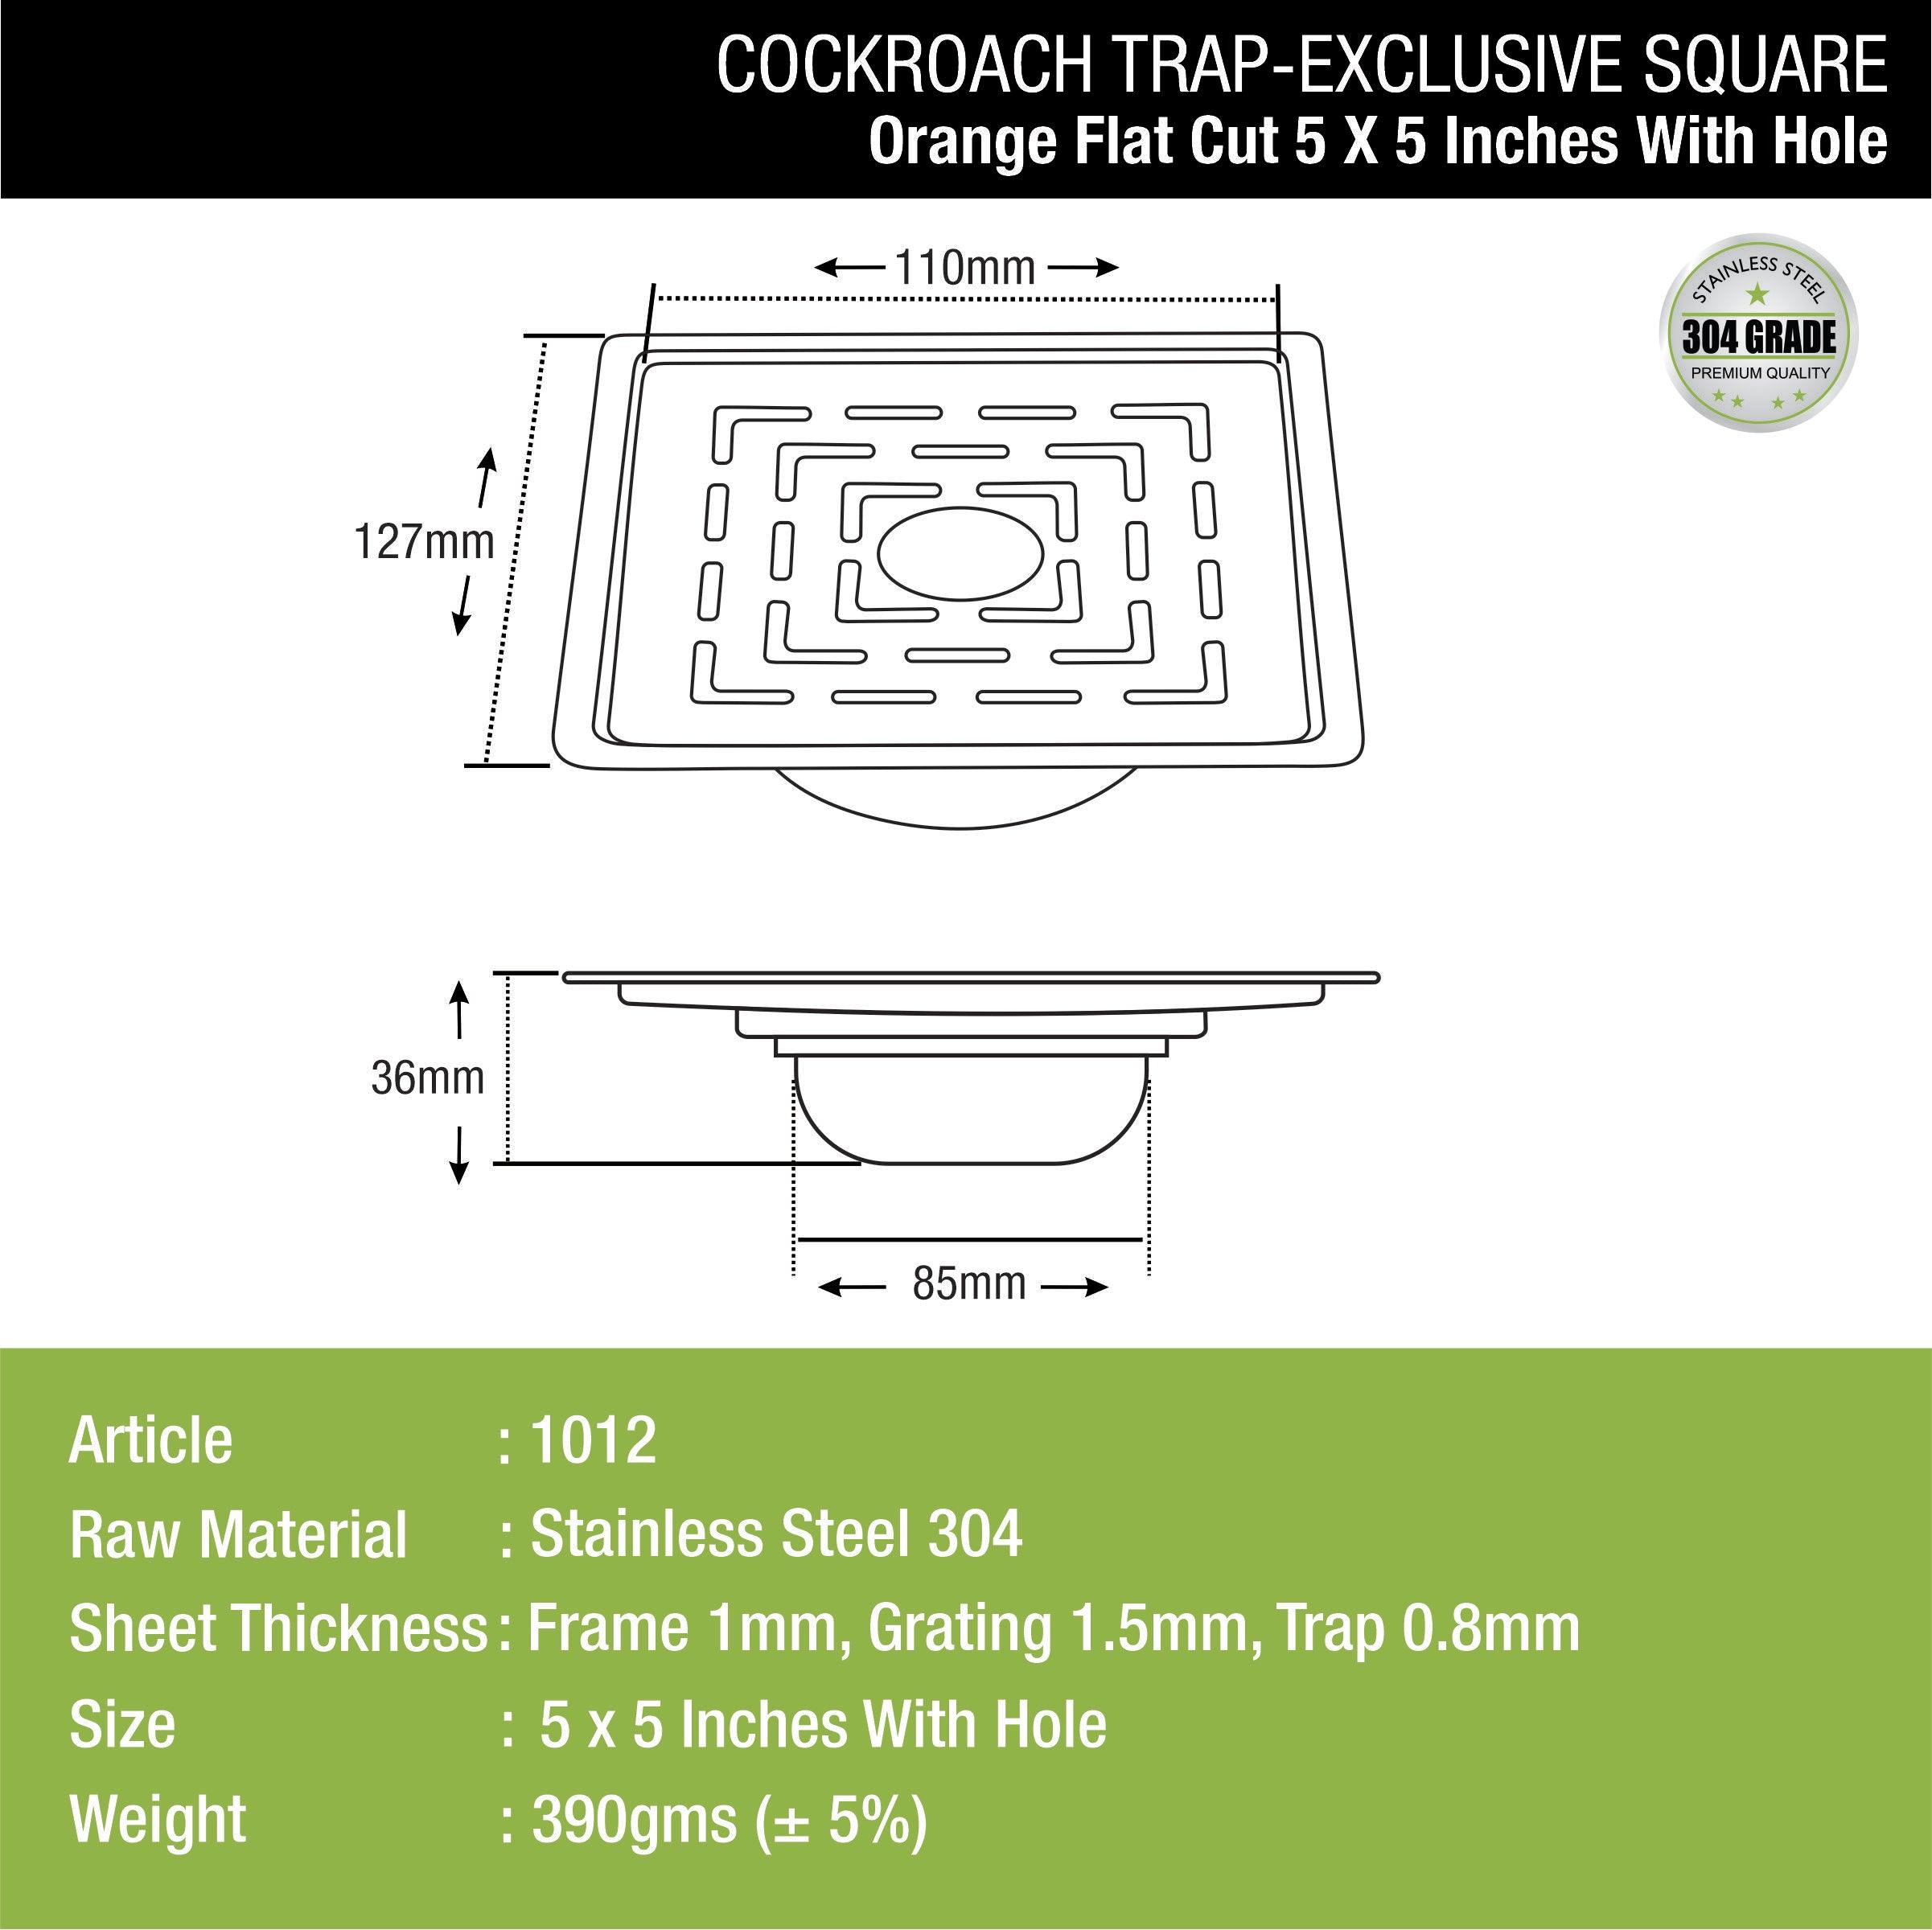 Orange Exclusive Square Flat Cut Floor Drain (5 Inches) with Cockroach Trap And Hole dimensions and sizes